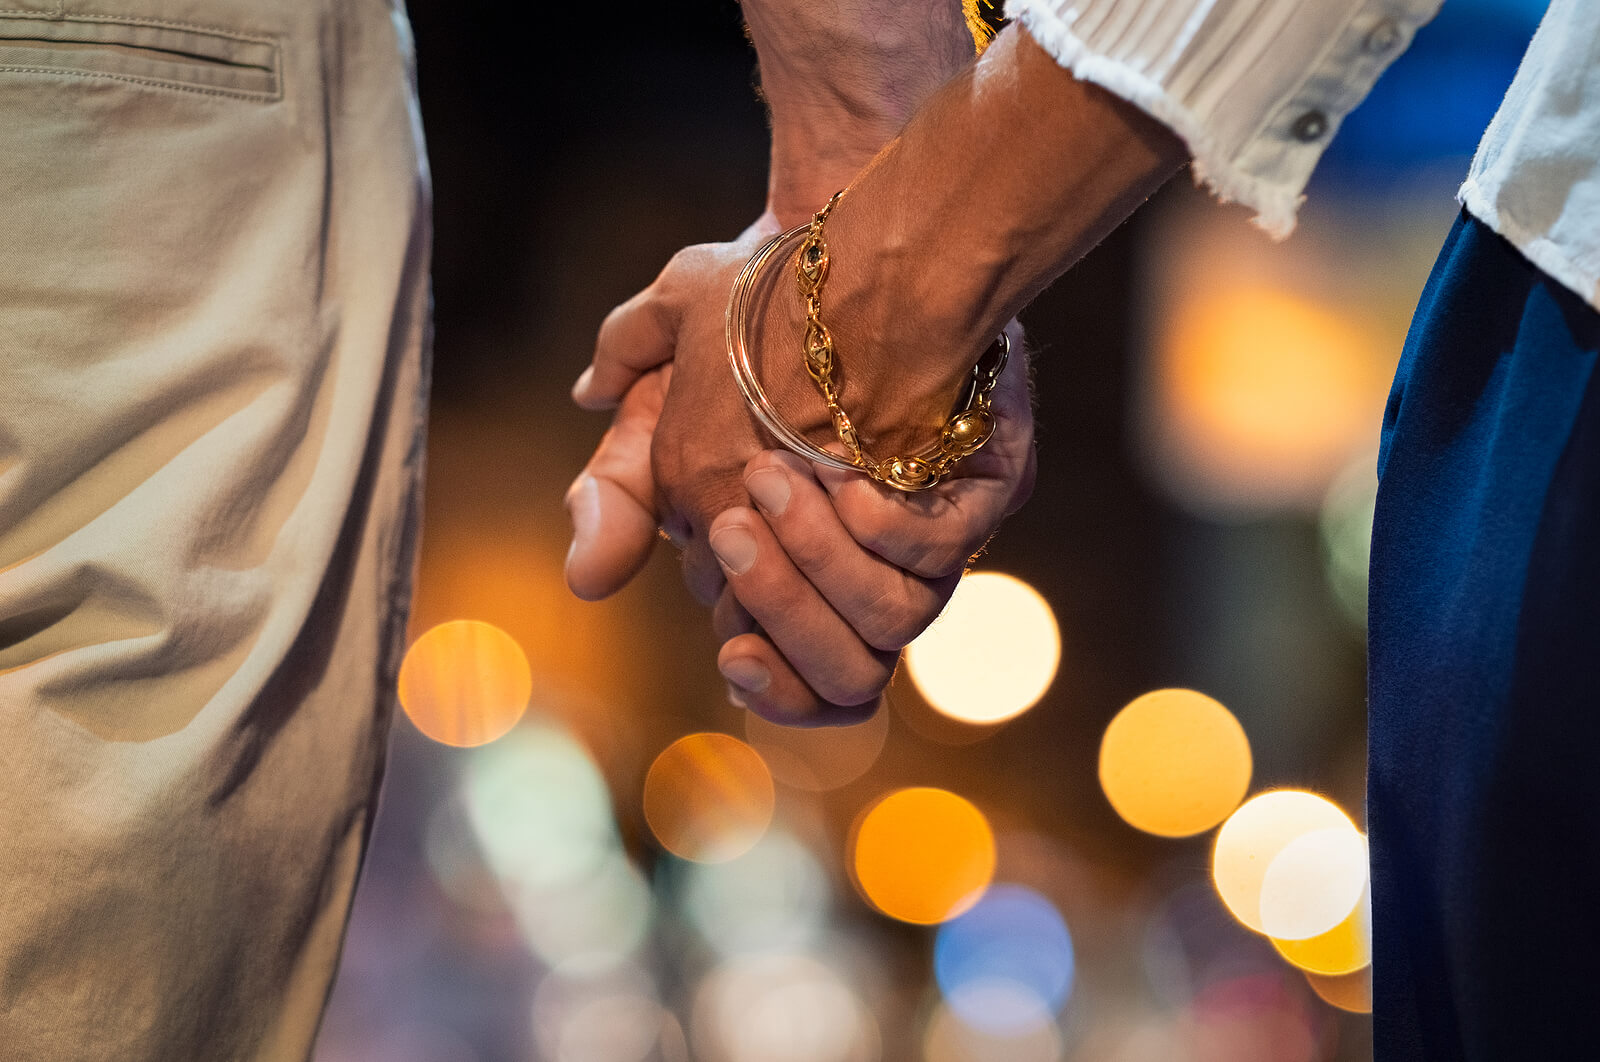 Couple walking at night with their hands clasped representing the deepened connection that can be formed with the help of Couples Counseling in San Antonio, TX.